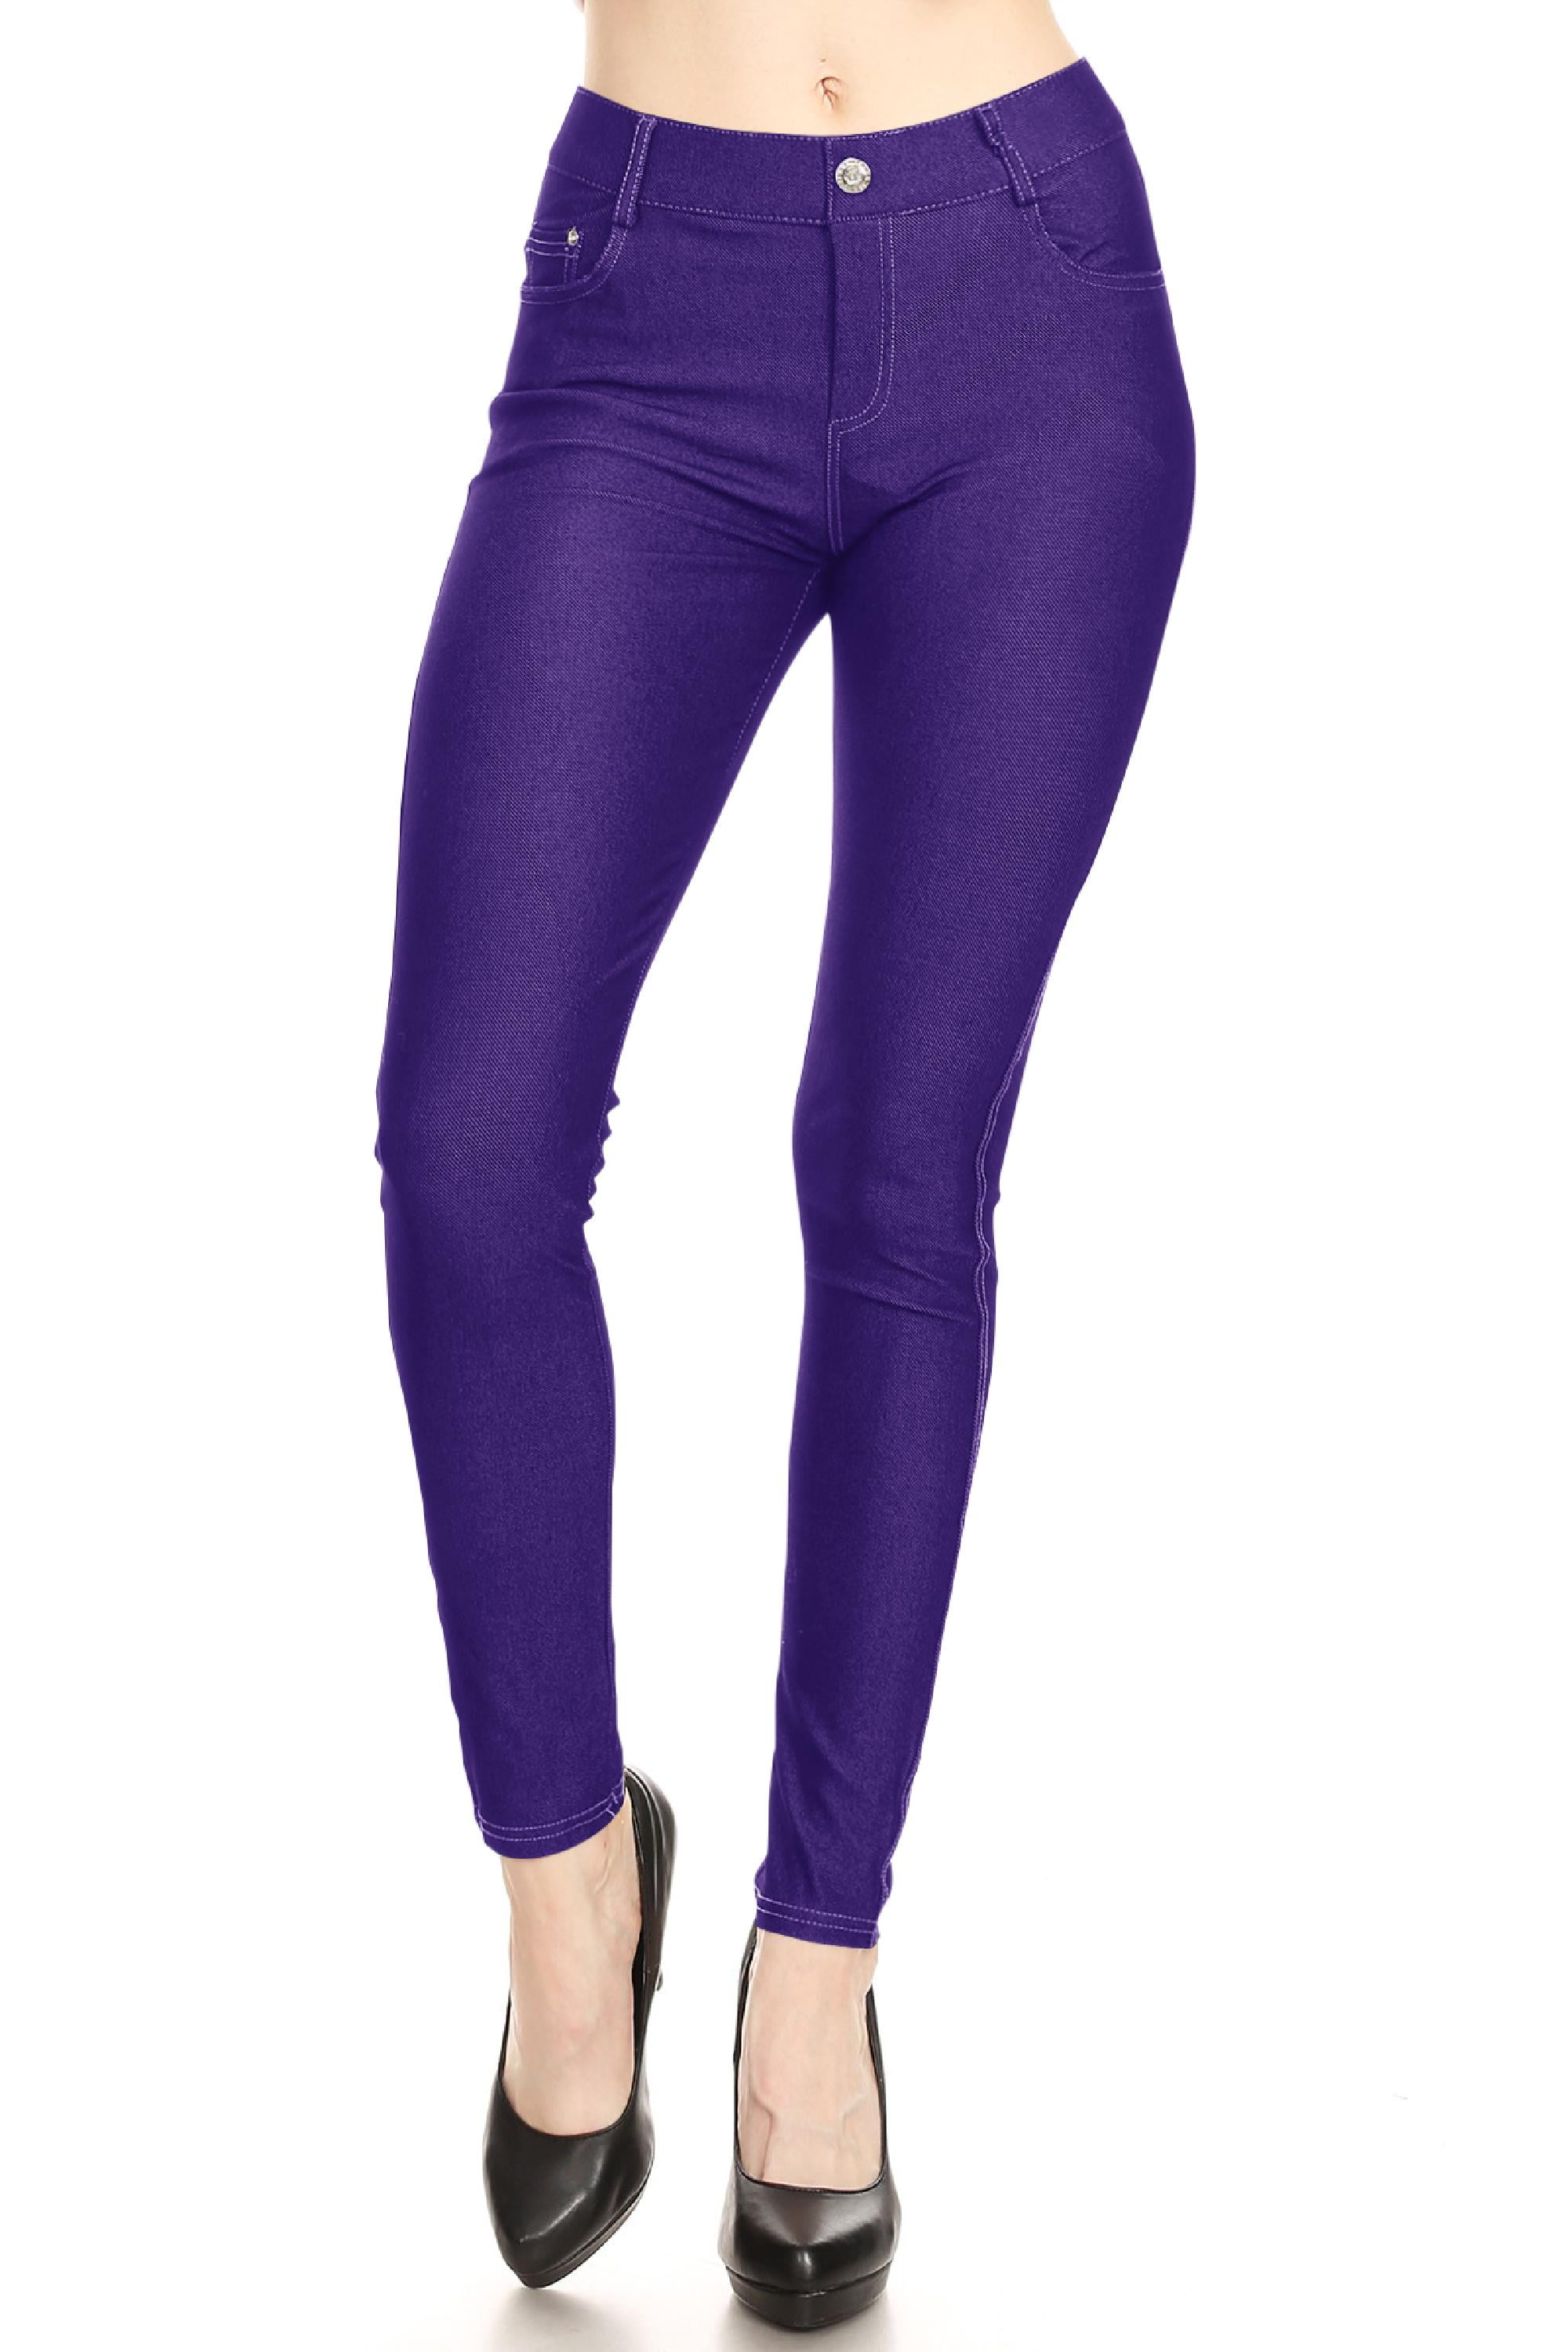 Women's Active Color Jeggings Spandex Stretchy Skinny Pants S-3XL 